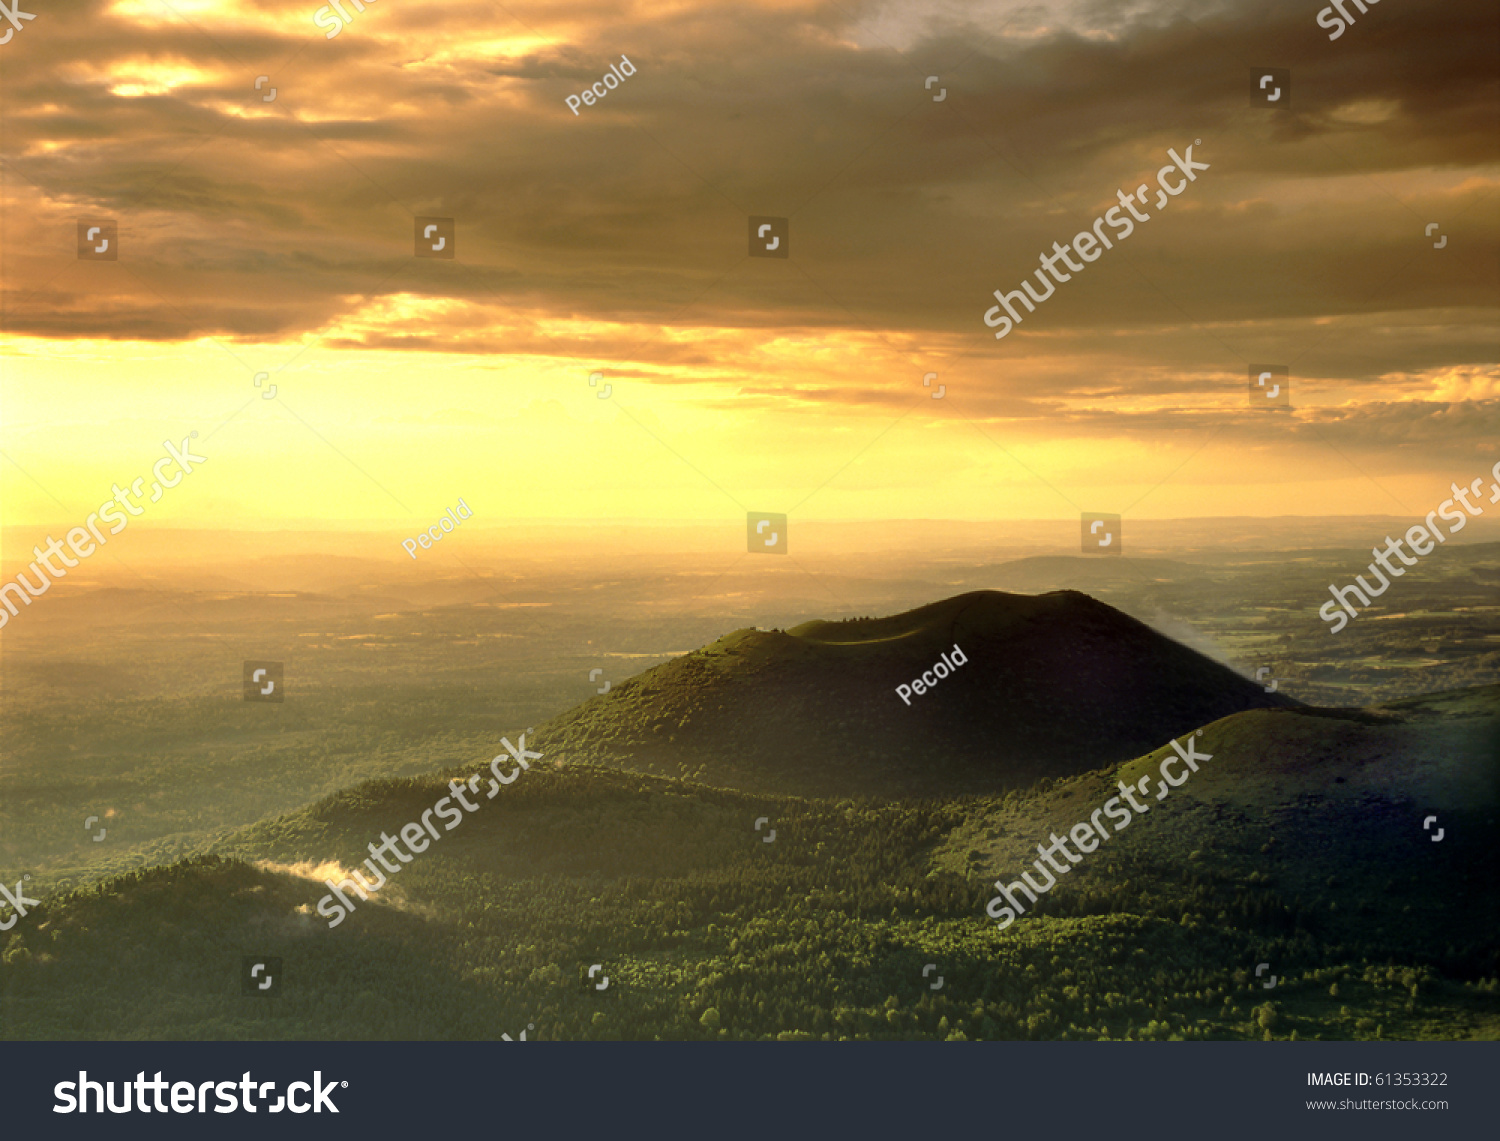 The volcano, Massif Central, Auvergne, France #61353322